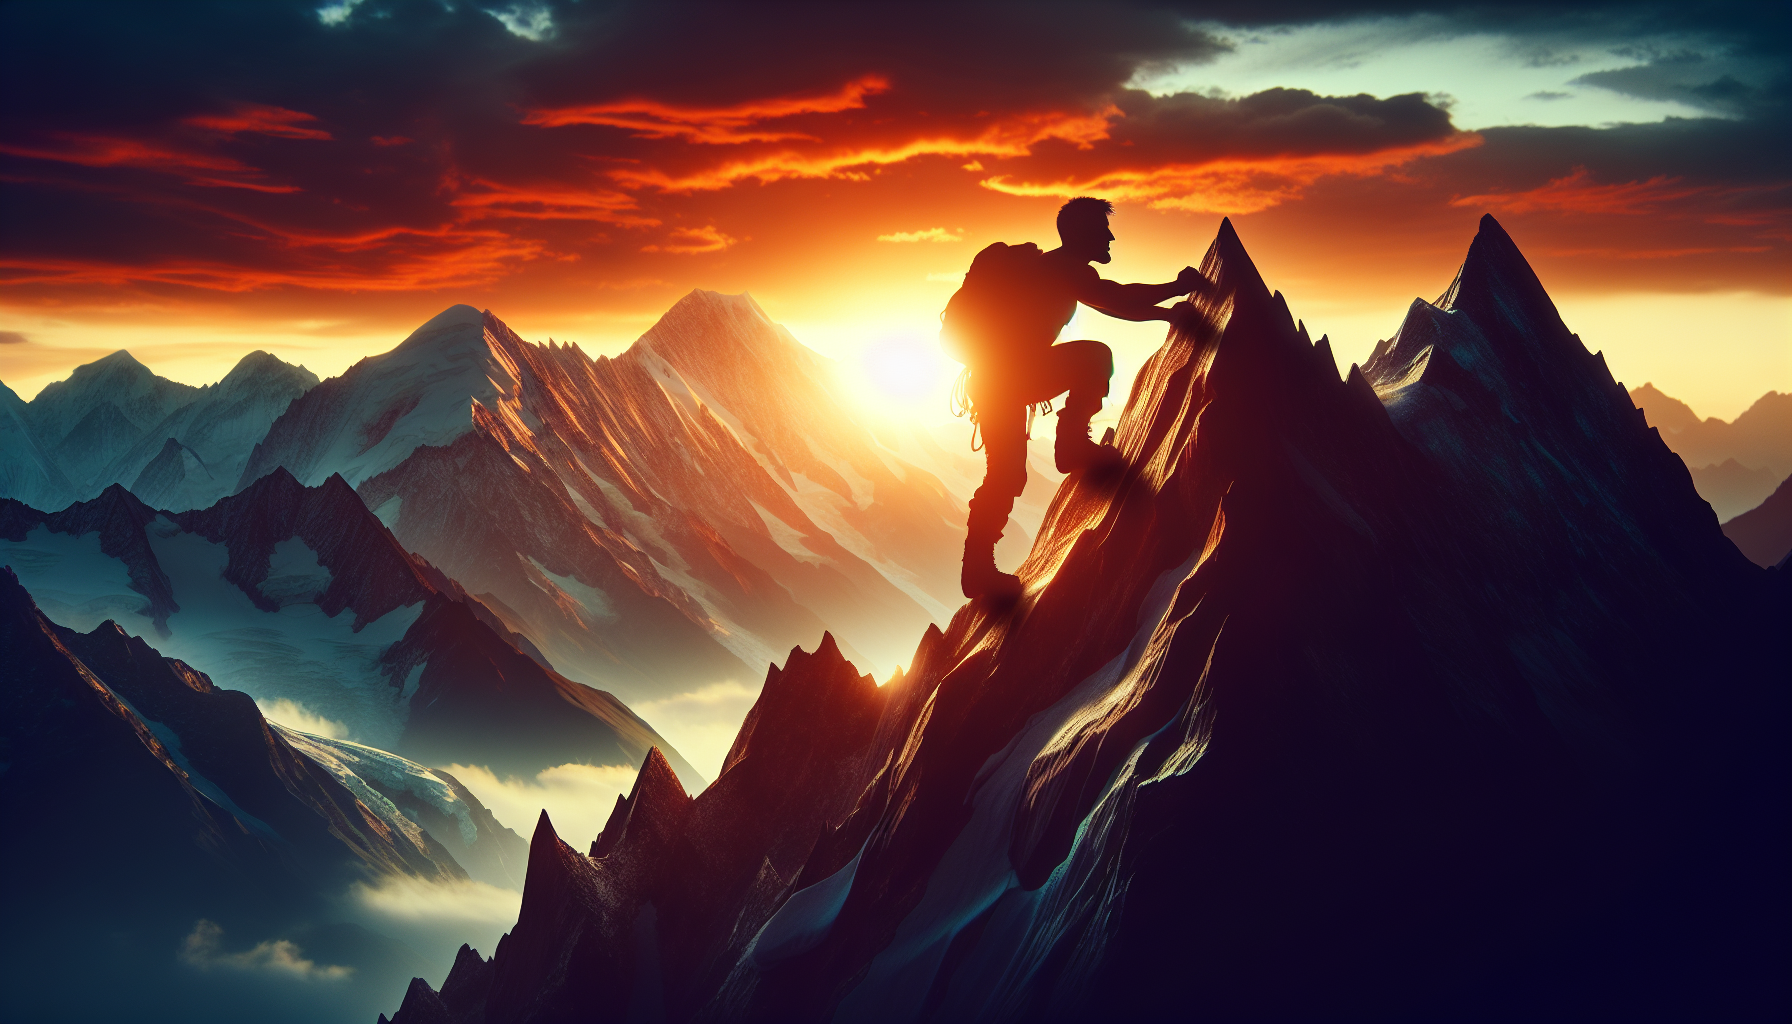 A person climbing a mountain, symbolizing resilience and inner strength